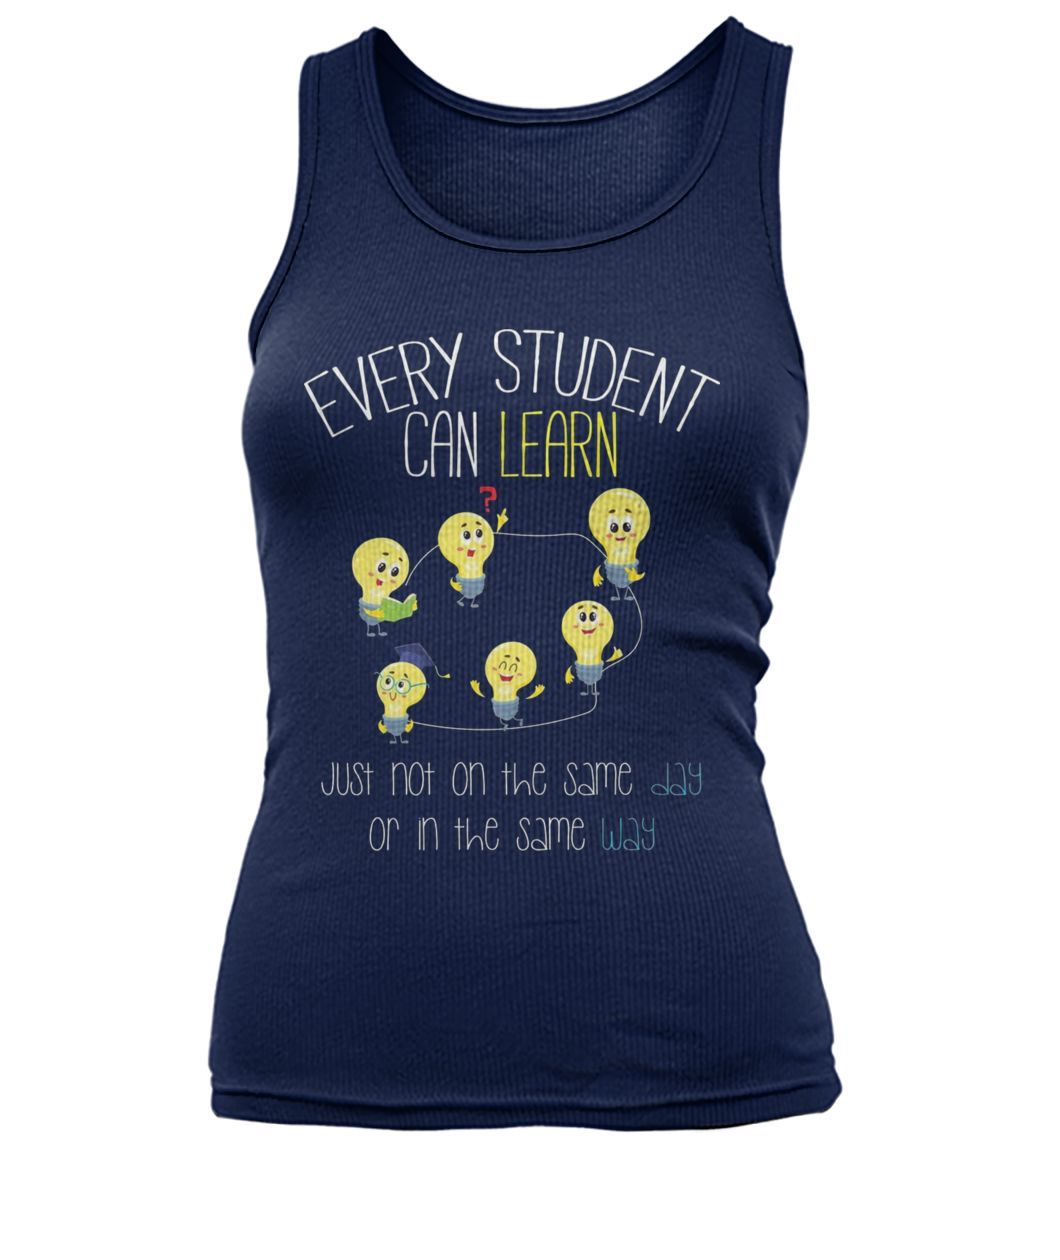 Bulds every student can learn just not on the same day women's tank top